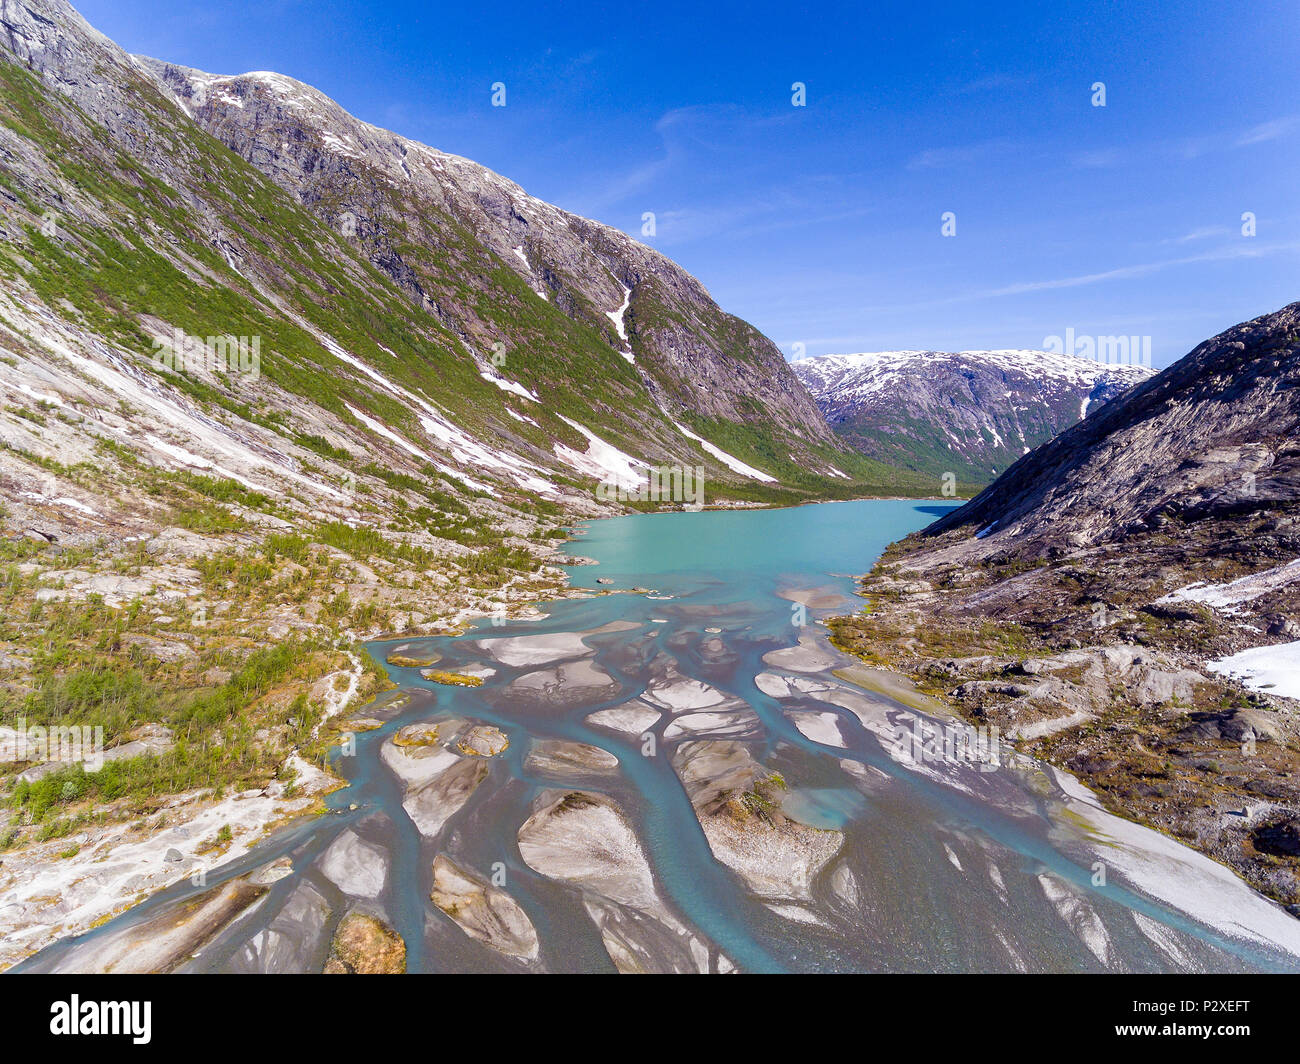 Aerial view near Nigardsbreen glacier in Nigardsvatnet Jostedalsbreen national park in Norway in a sunny day Stock Photo